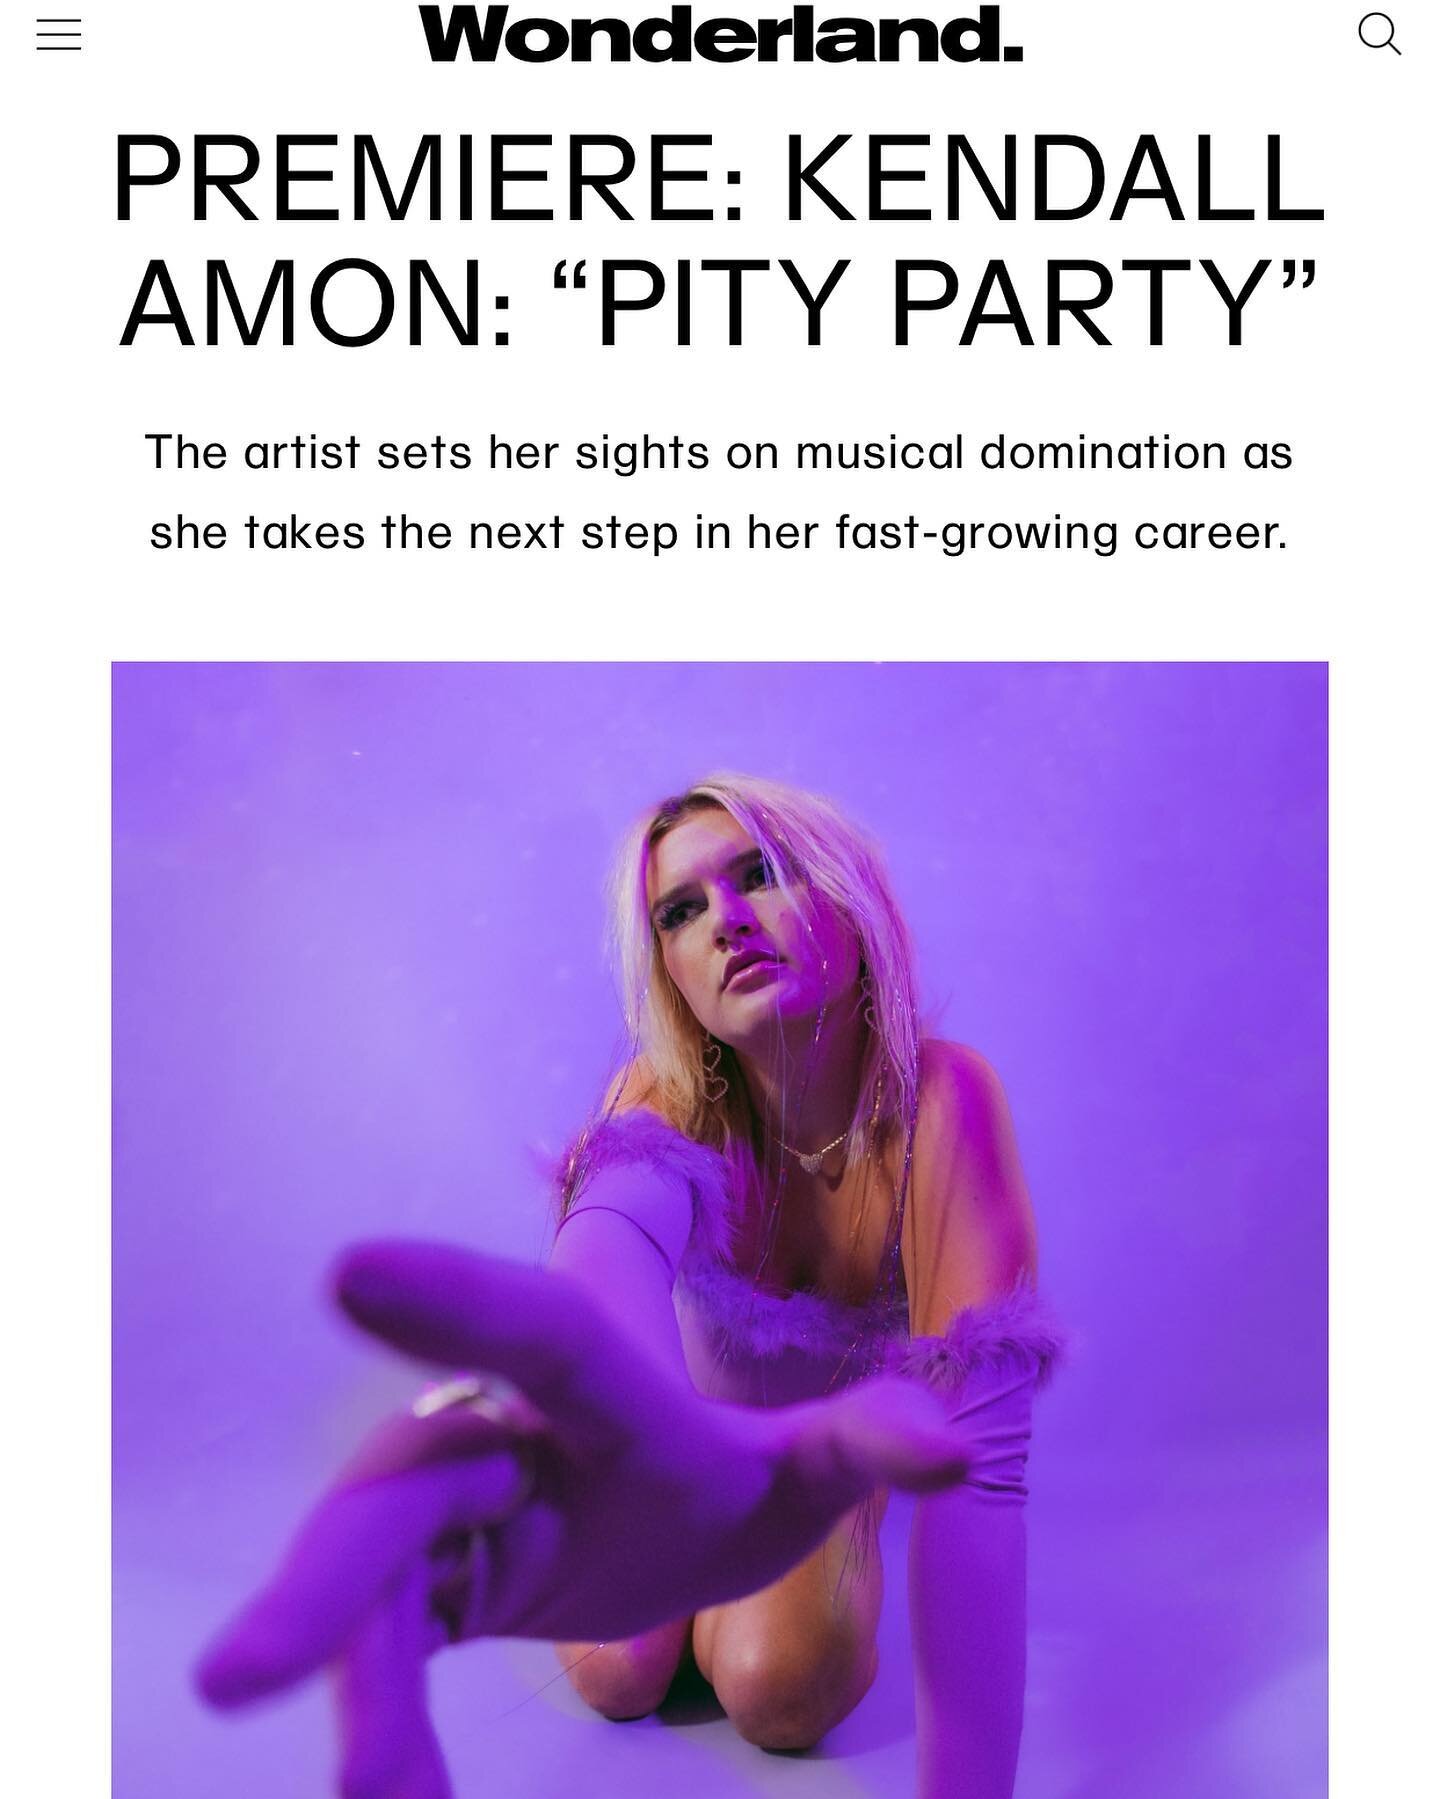 Thank you @wonderland for the premiere of &ldquo;Pity Party&rdquo; 🎉🎂
Check out the music video &amp; comment your favorite lewk 😈💋